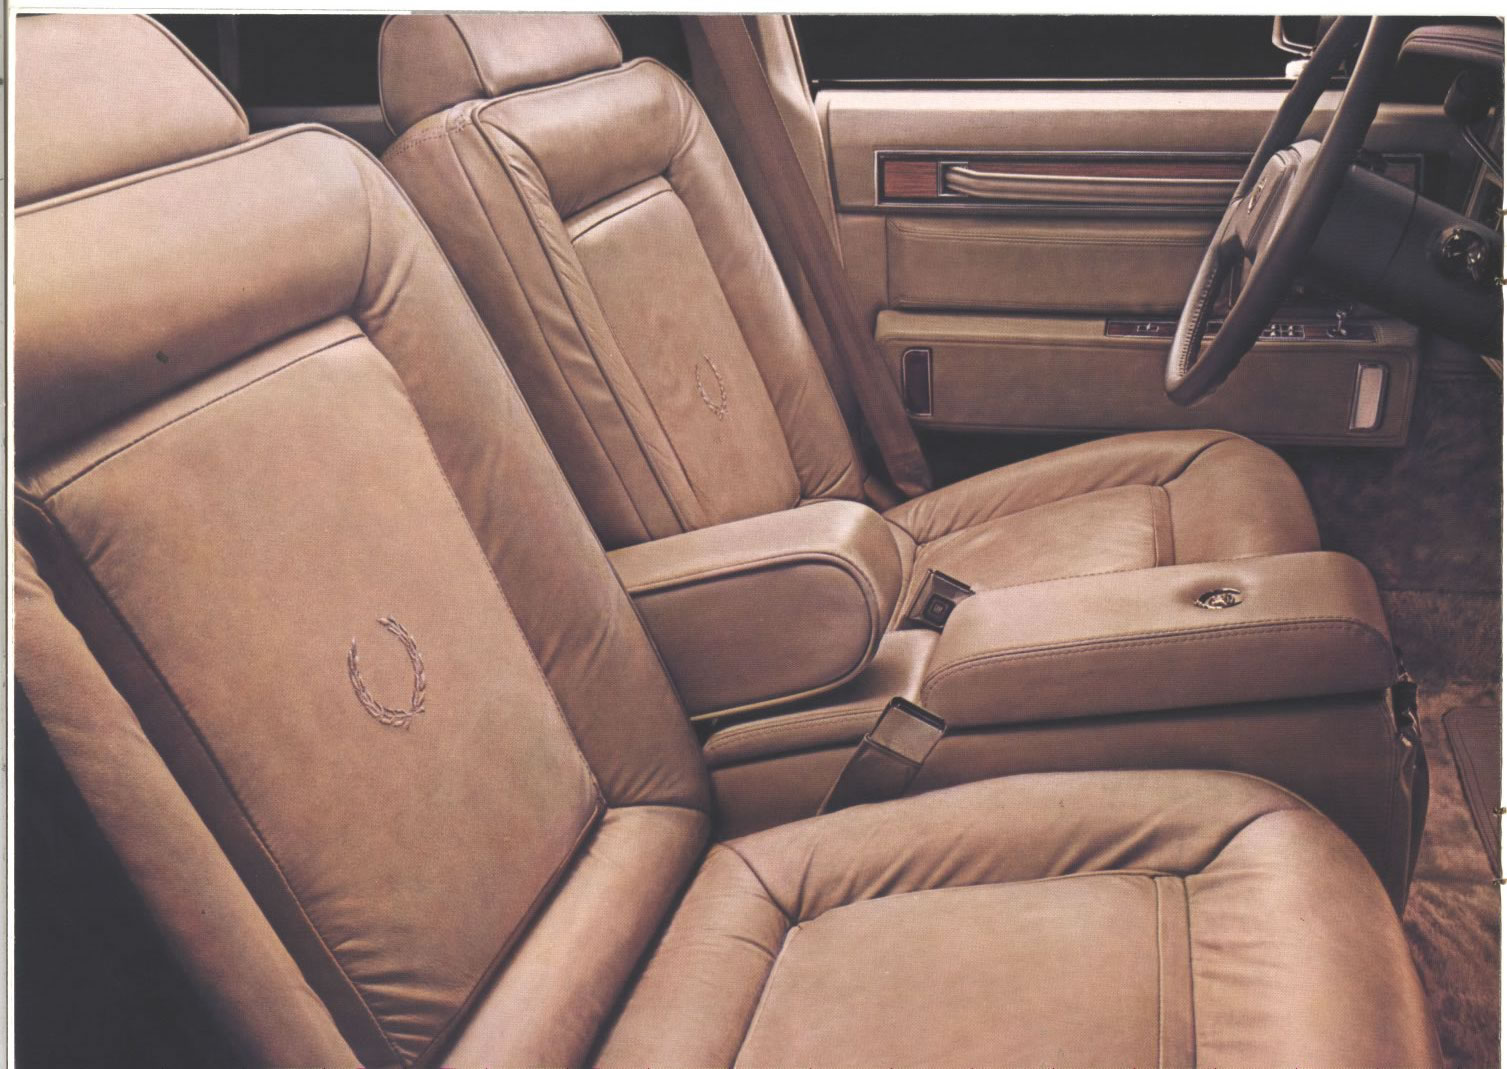 1980 Cadillac Preview-10